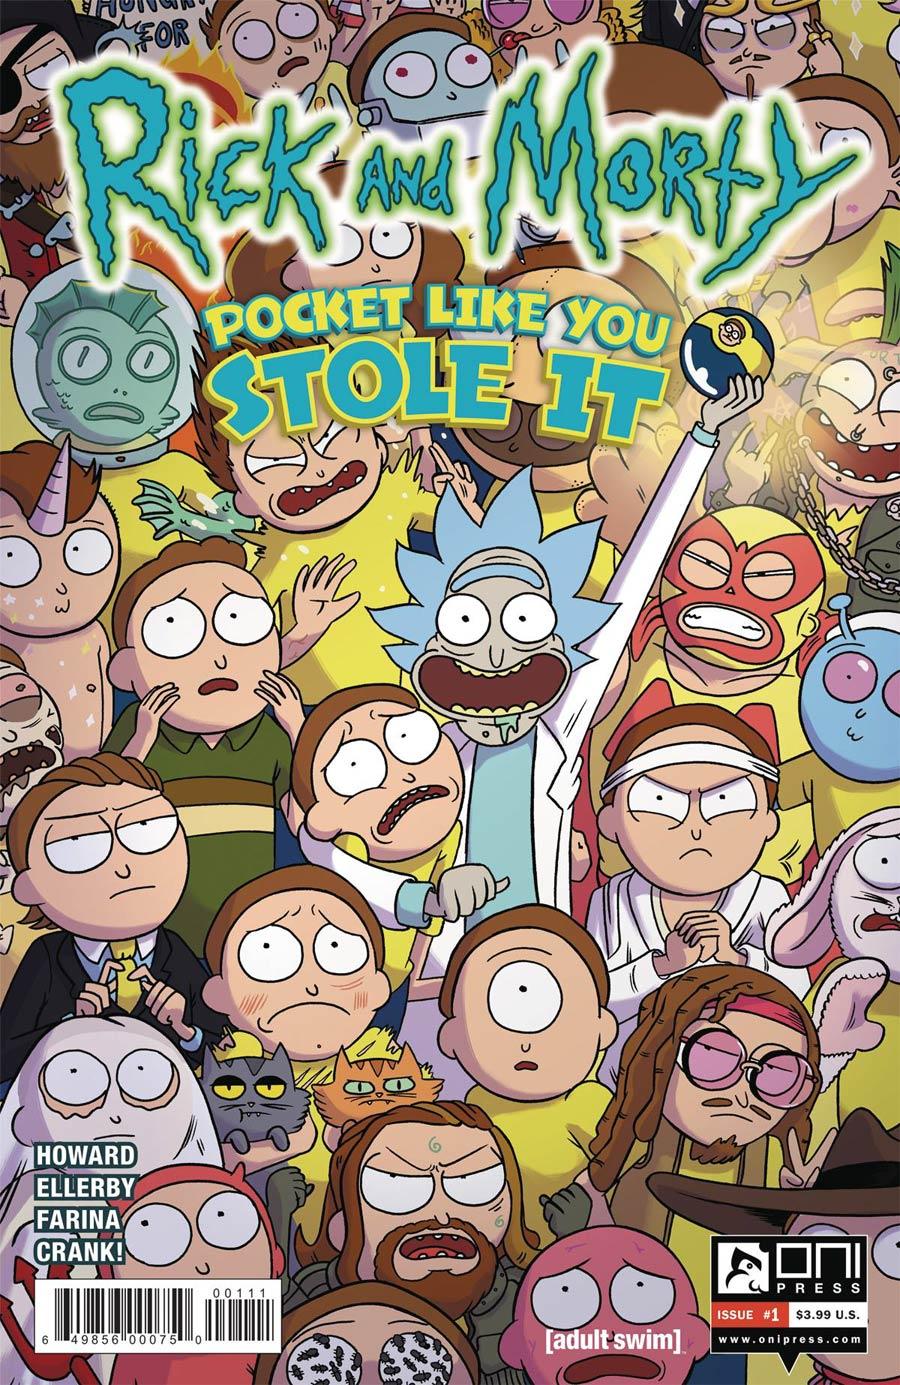 Rick And Morty Pocket Like You Stole It Vol. 1 #1